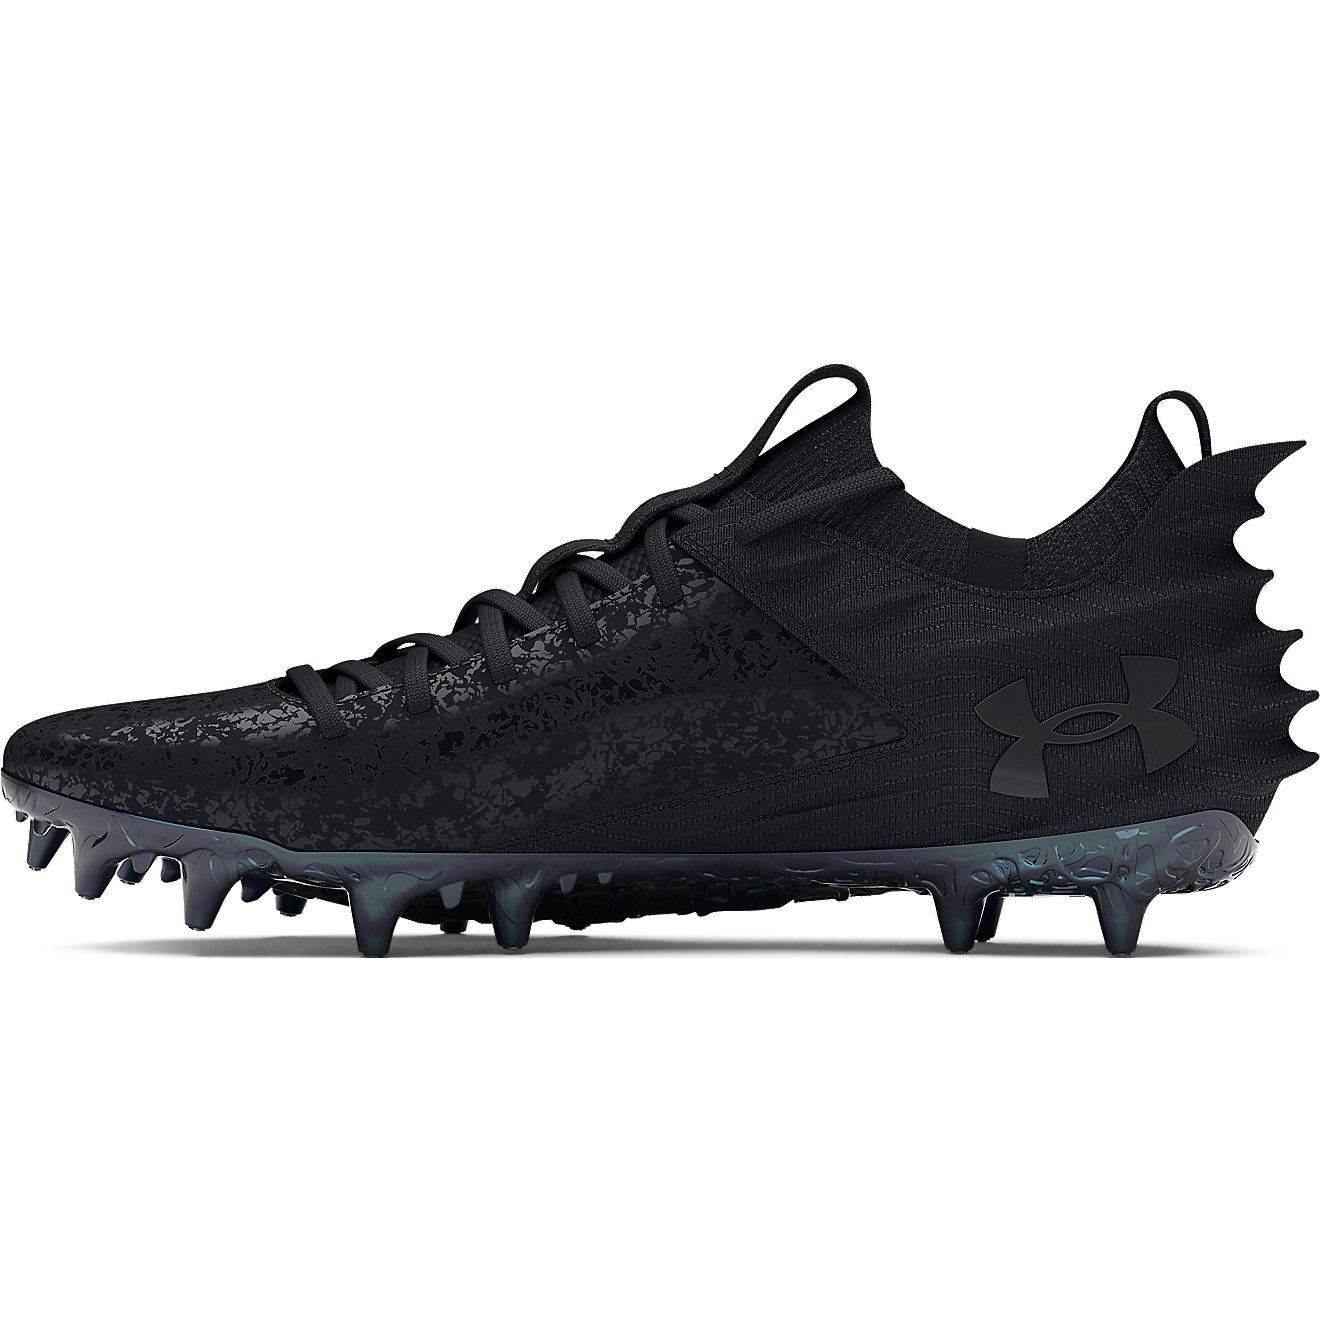 Under Armour Men's Blur Smoke Suede 2.0 MC Football Cleats                                                                       - view number 2